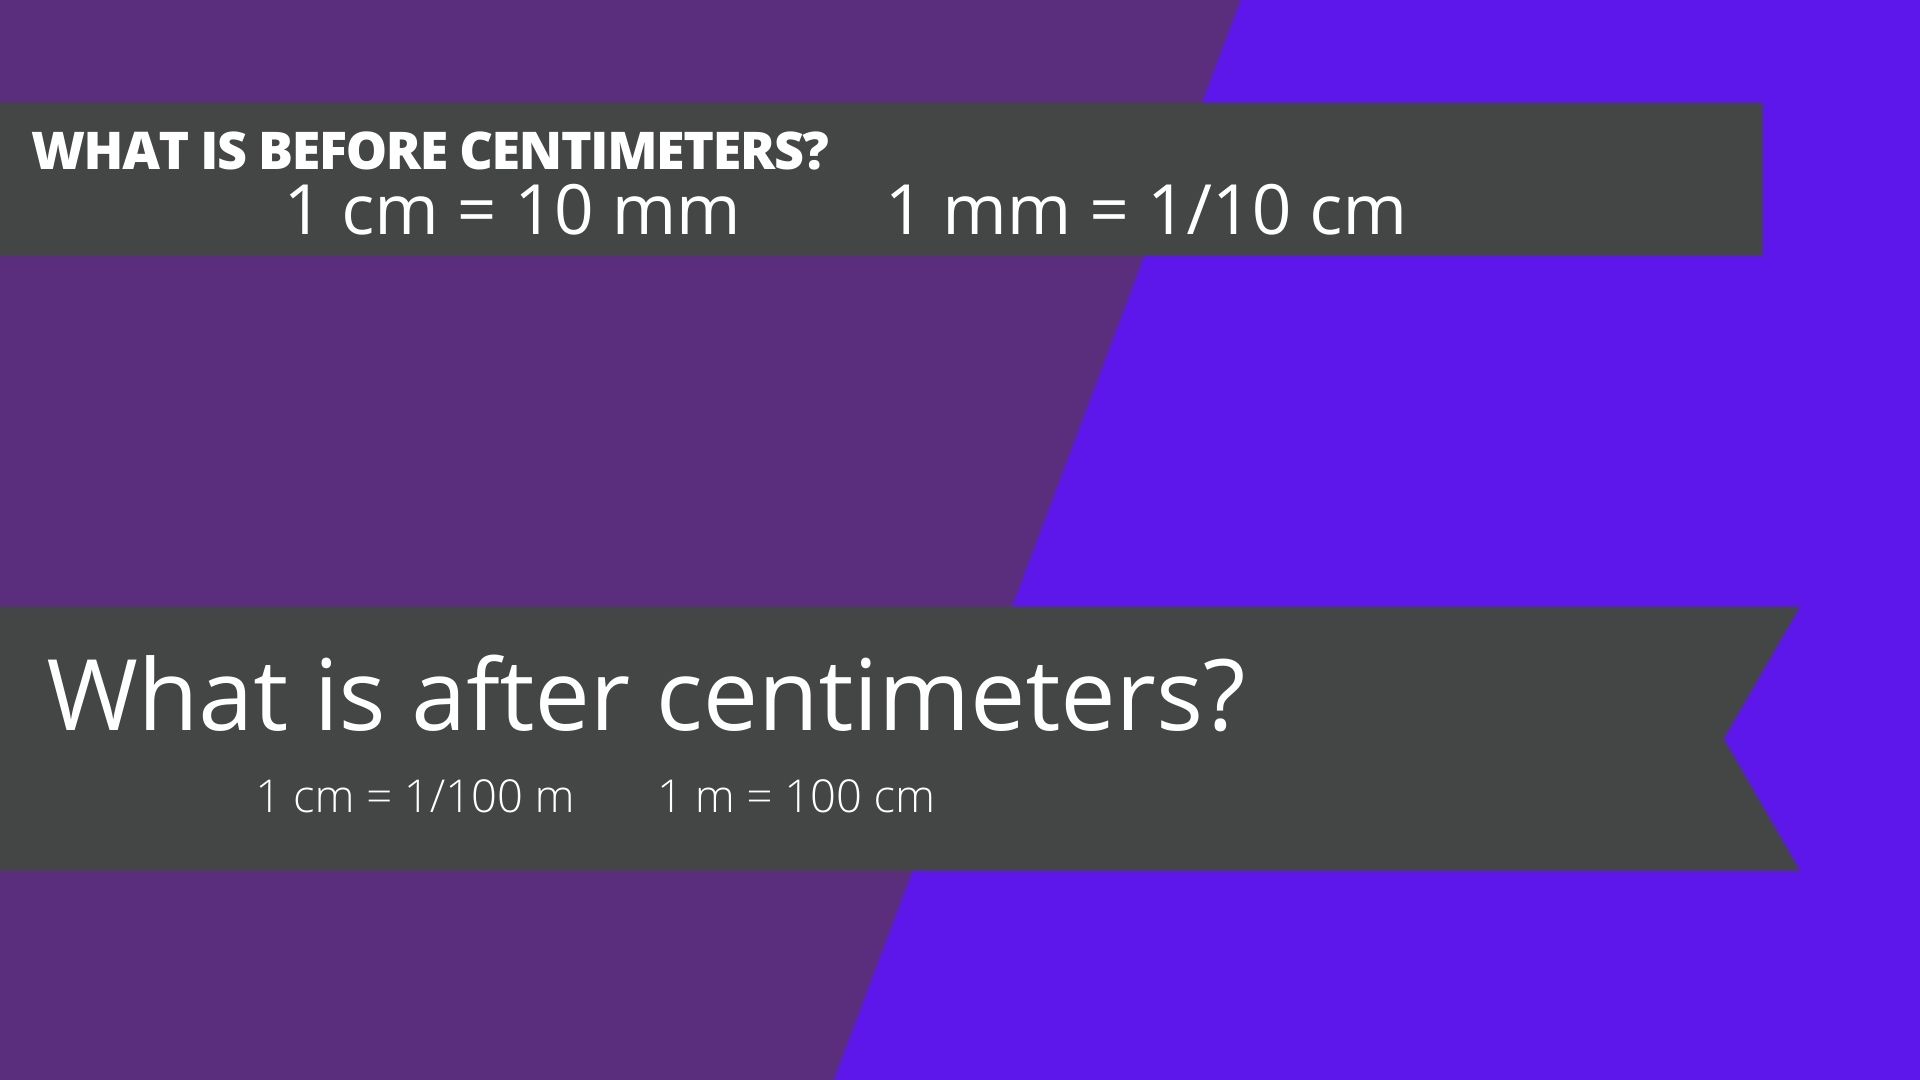 What is before centimeters? What is after centimeters?